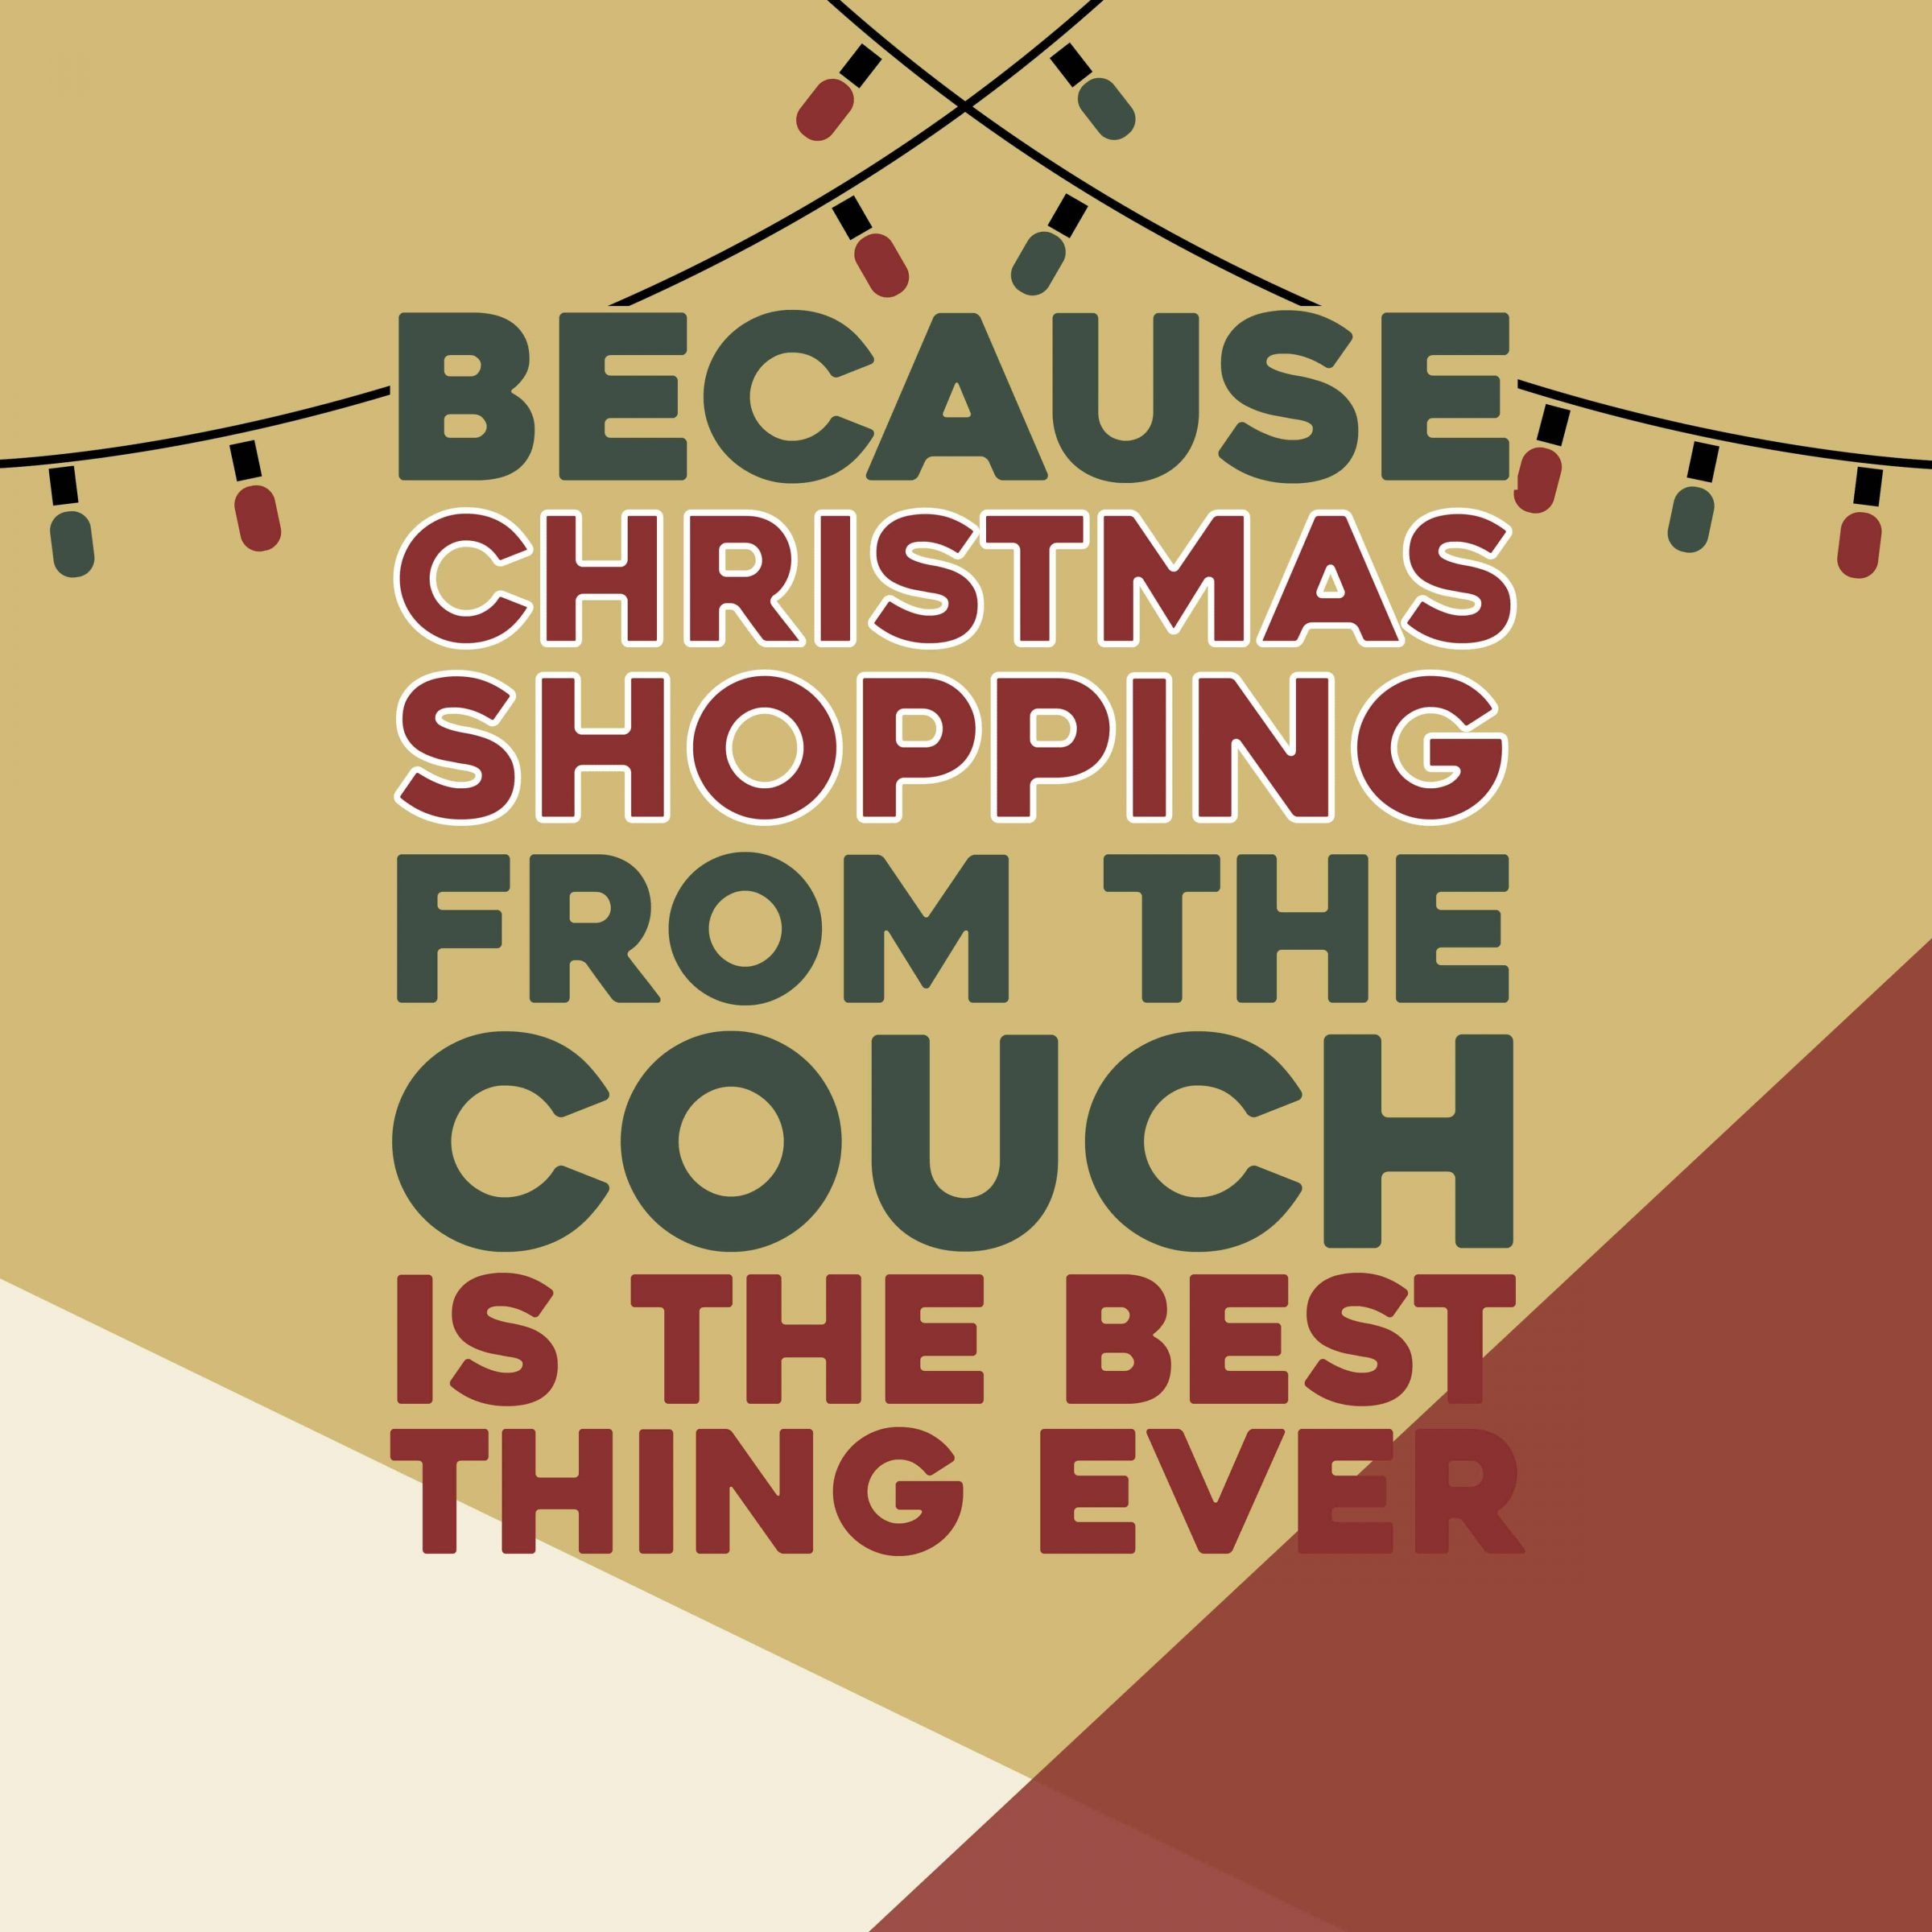 Because Christmas Shopping from the Couch is The Best Ever.